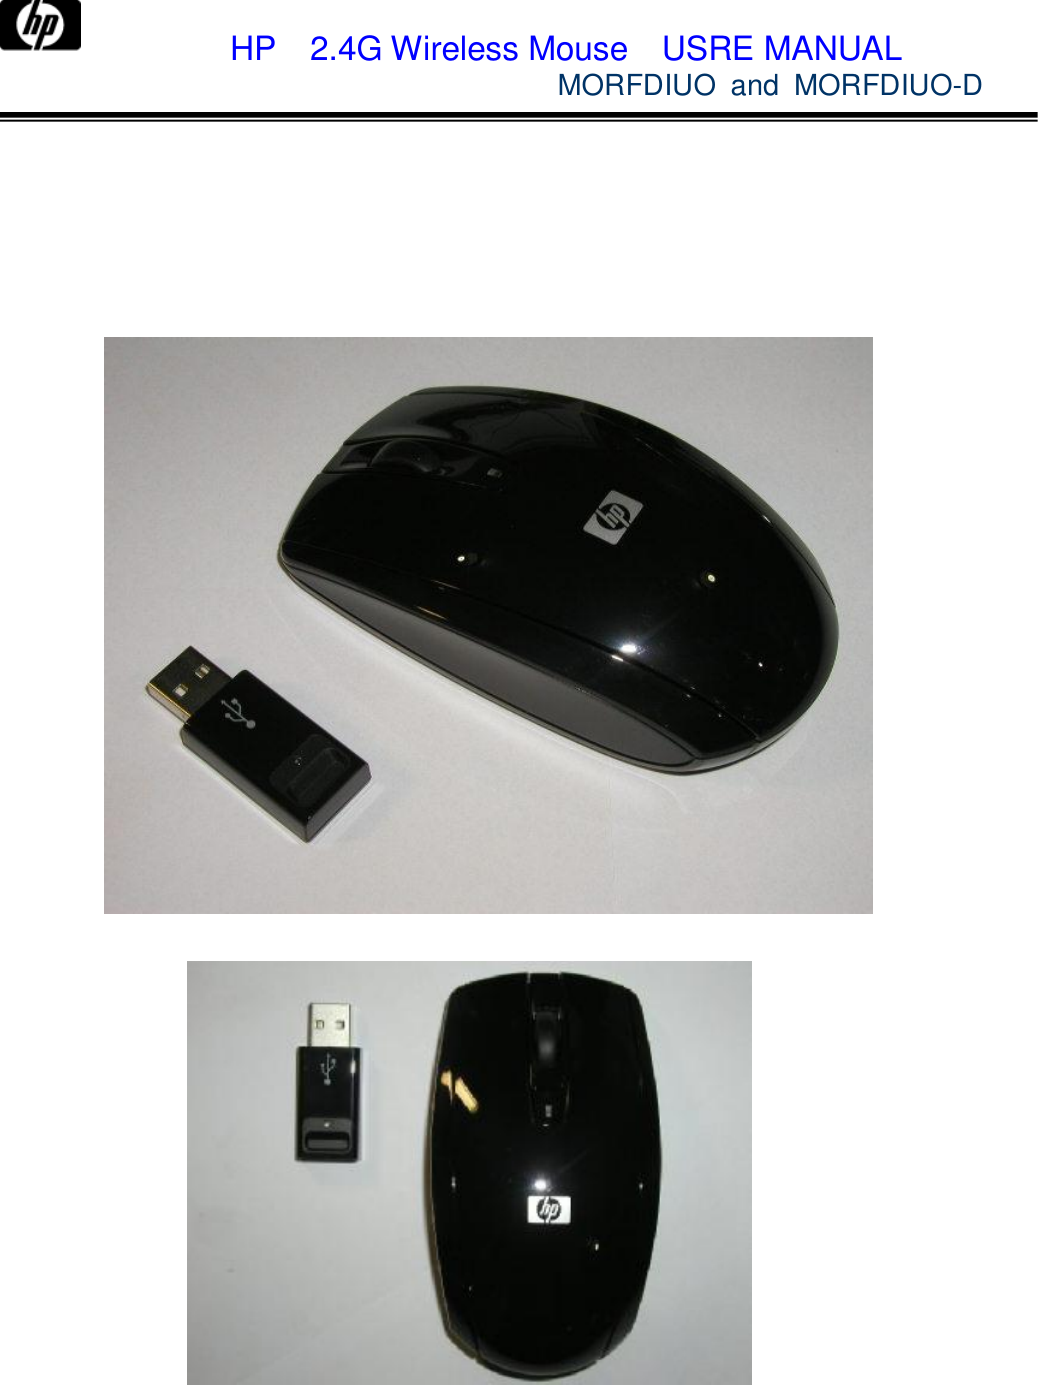             HP  2.4G Wireless Mouse  USRE MANUAL            MORFDIUO and MORFDIUO-D                 